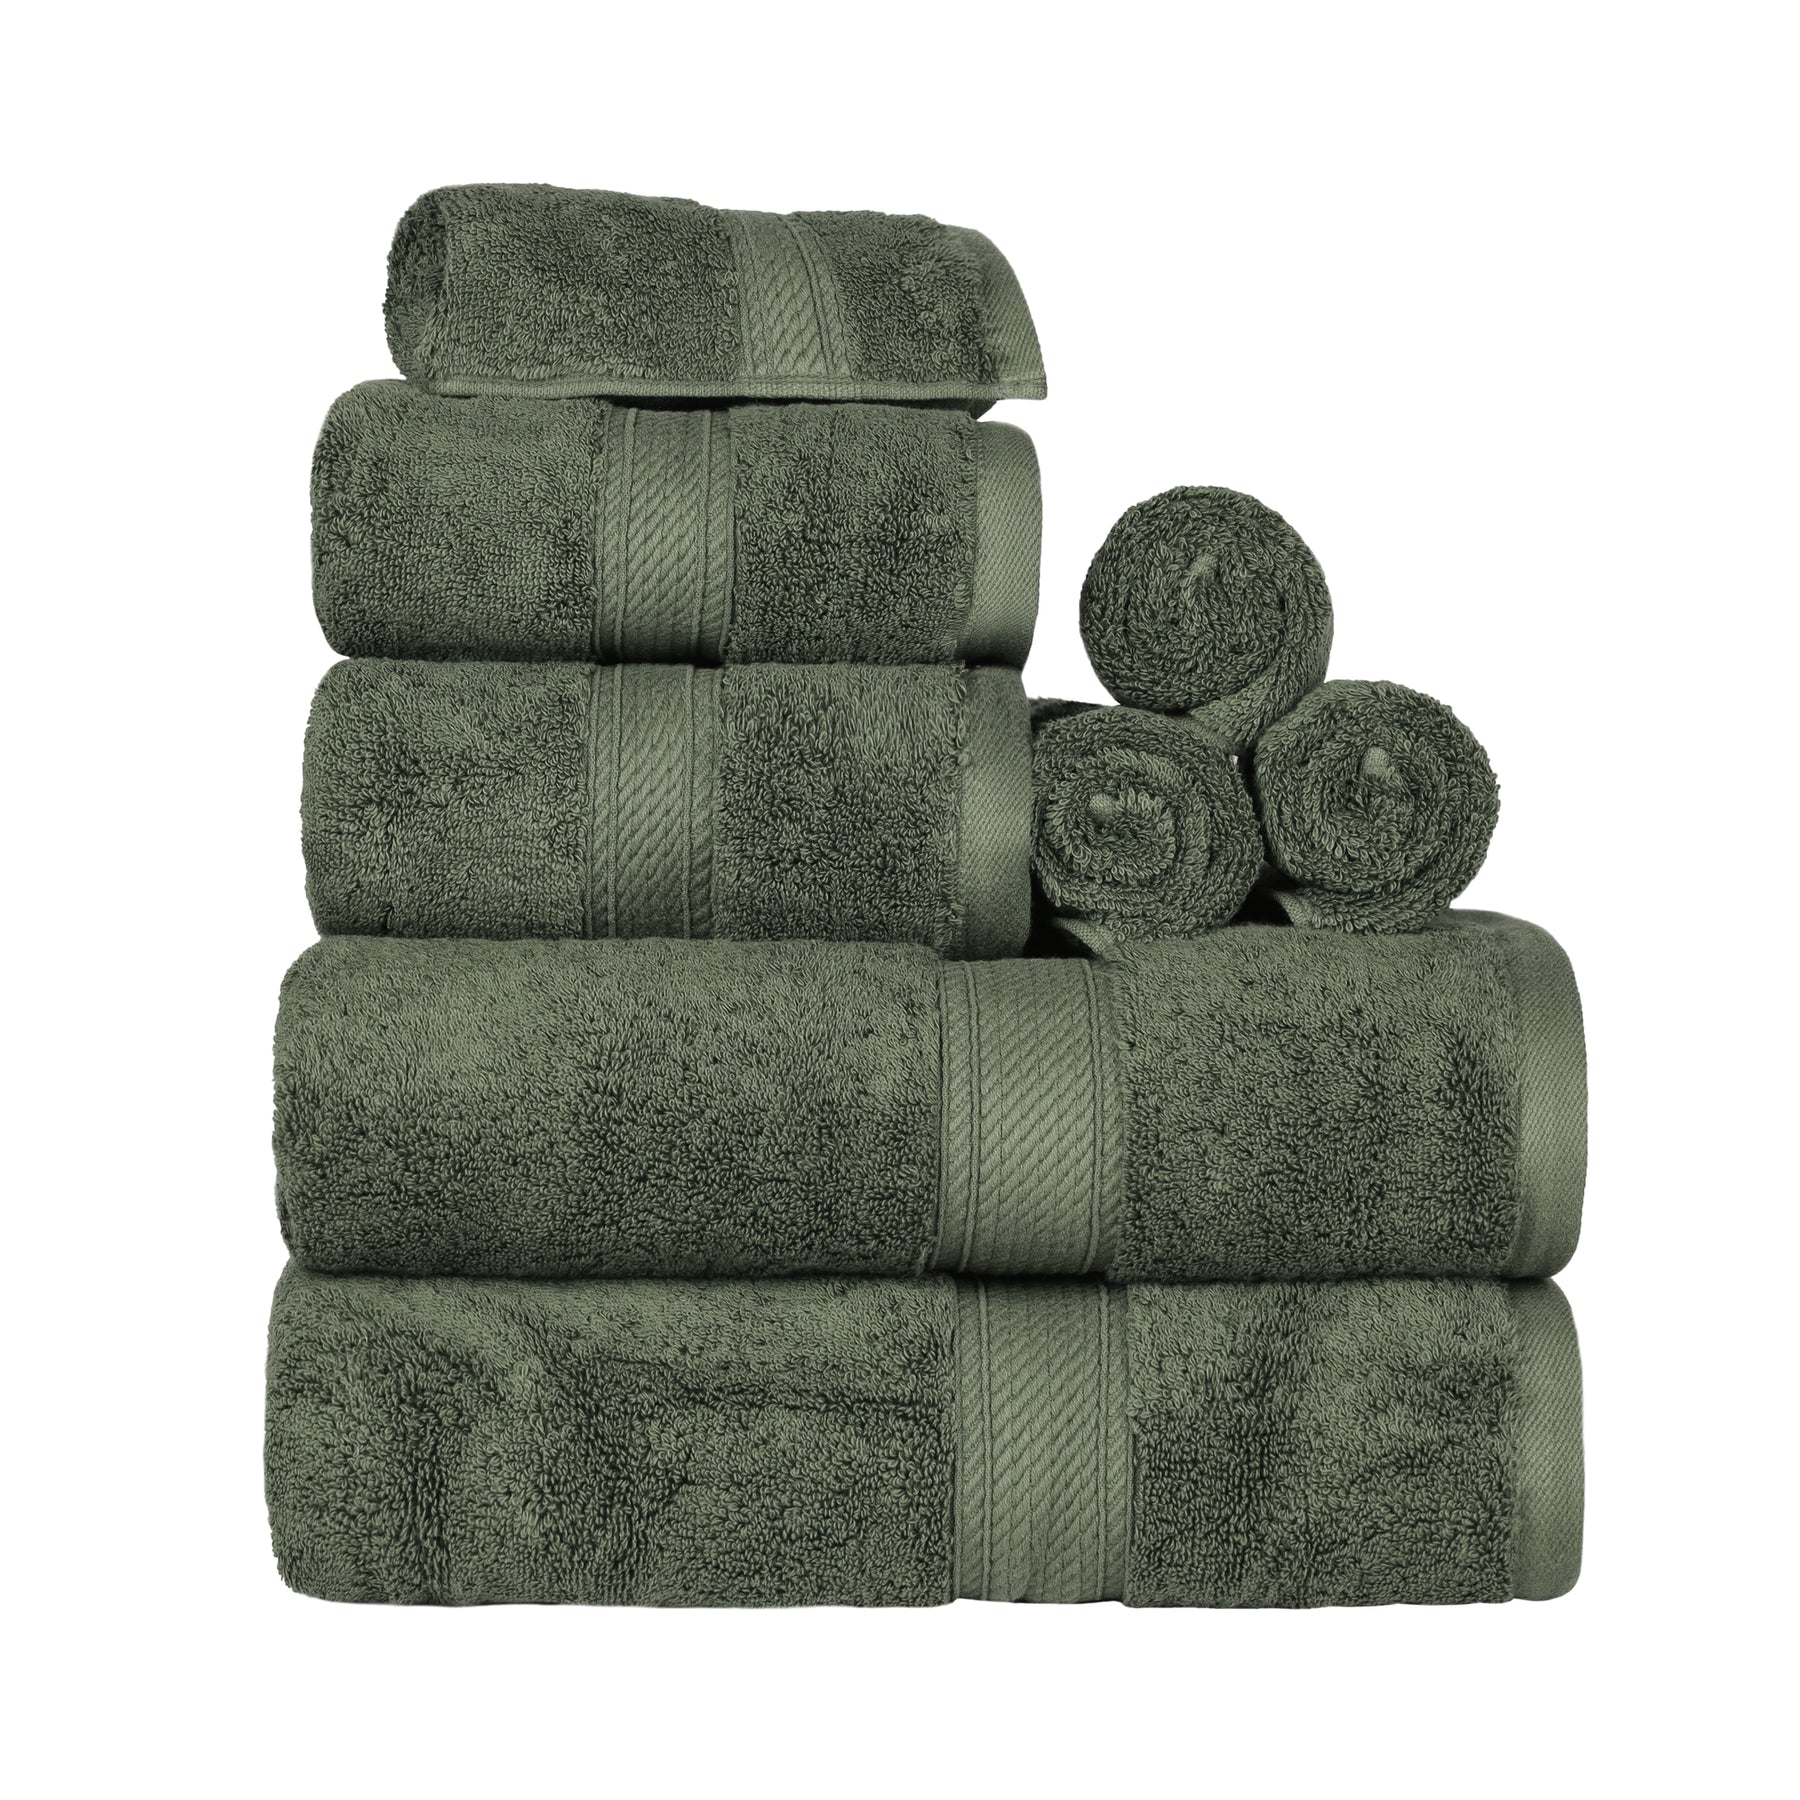 Long Staple Combed Cotton Highly Absorbent Solid 8-Piece Towel Set - Green Essence